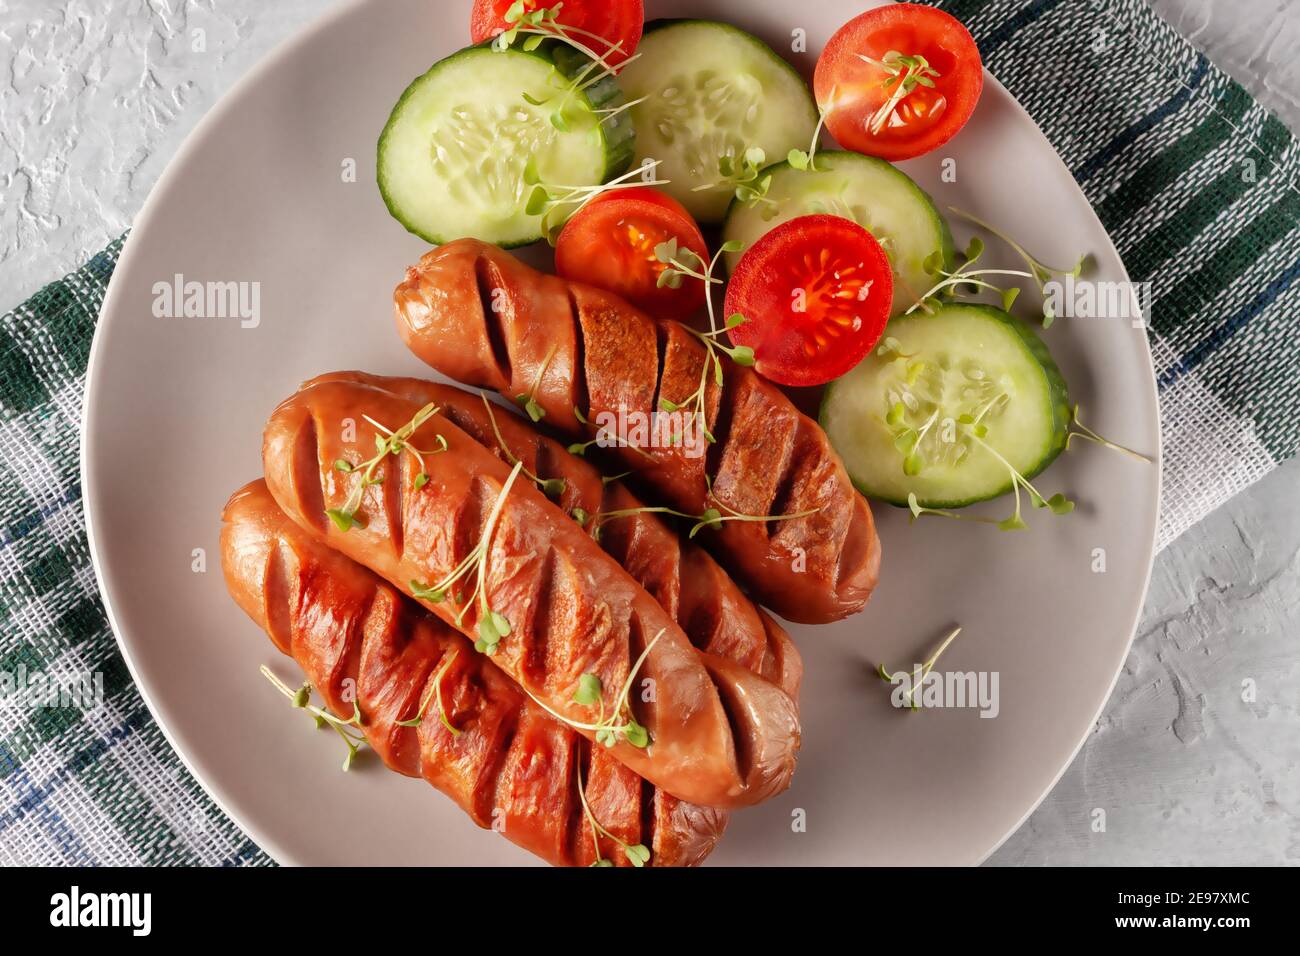 Grilled sausages with fresh vegetables are on the platter Stock Photo